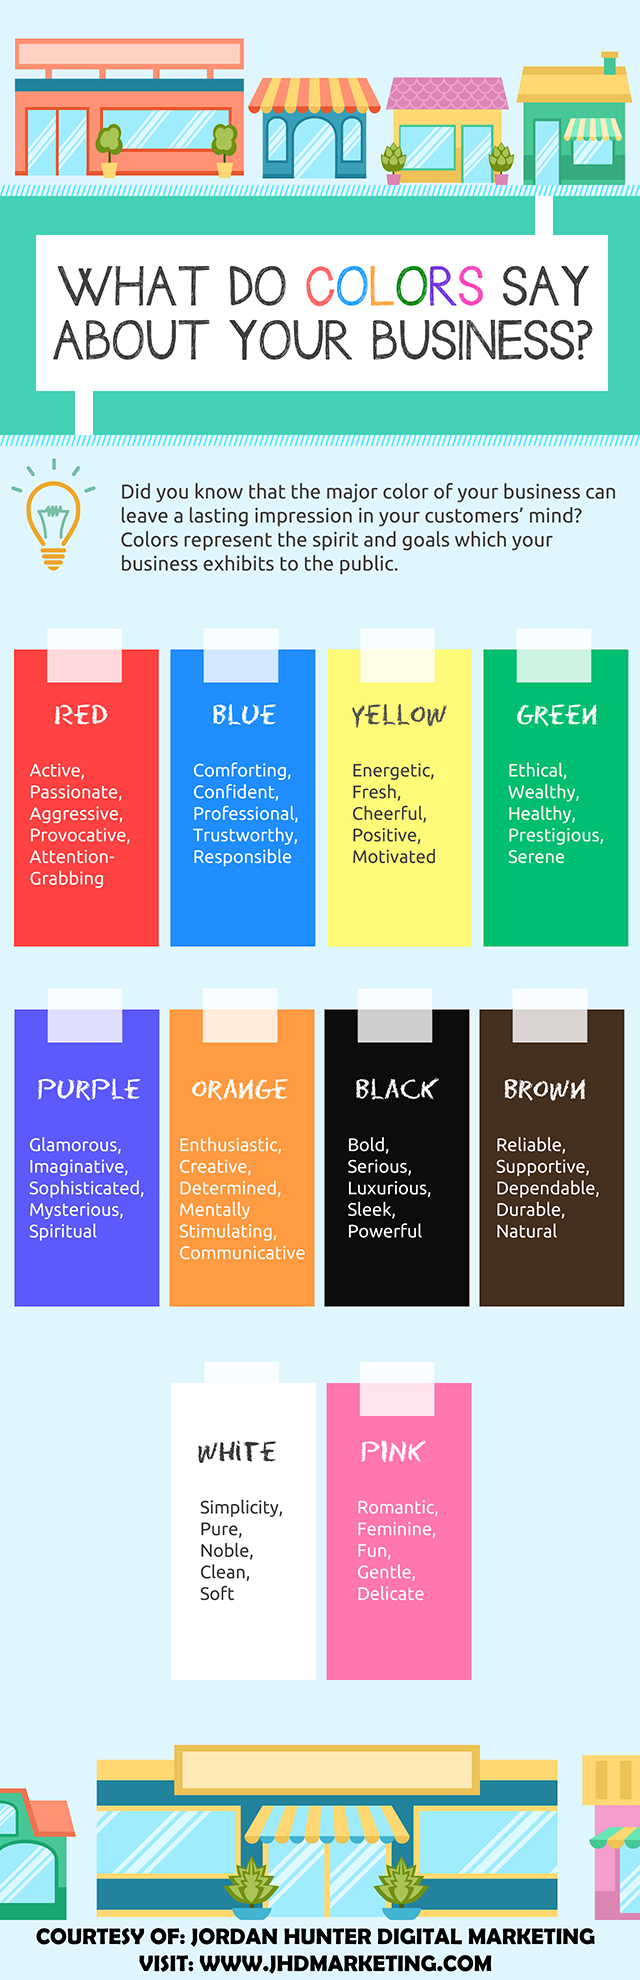 What Do Colors Say About Your Business